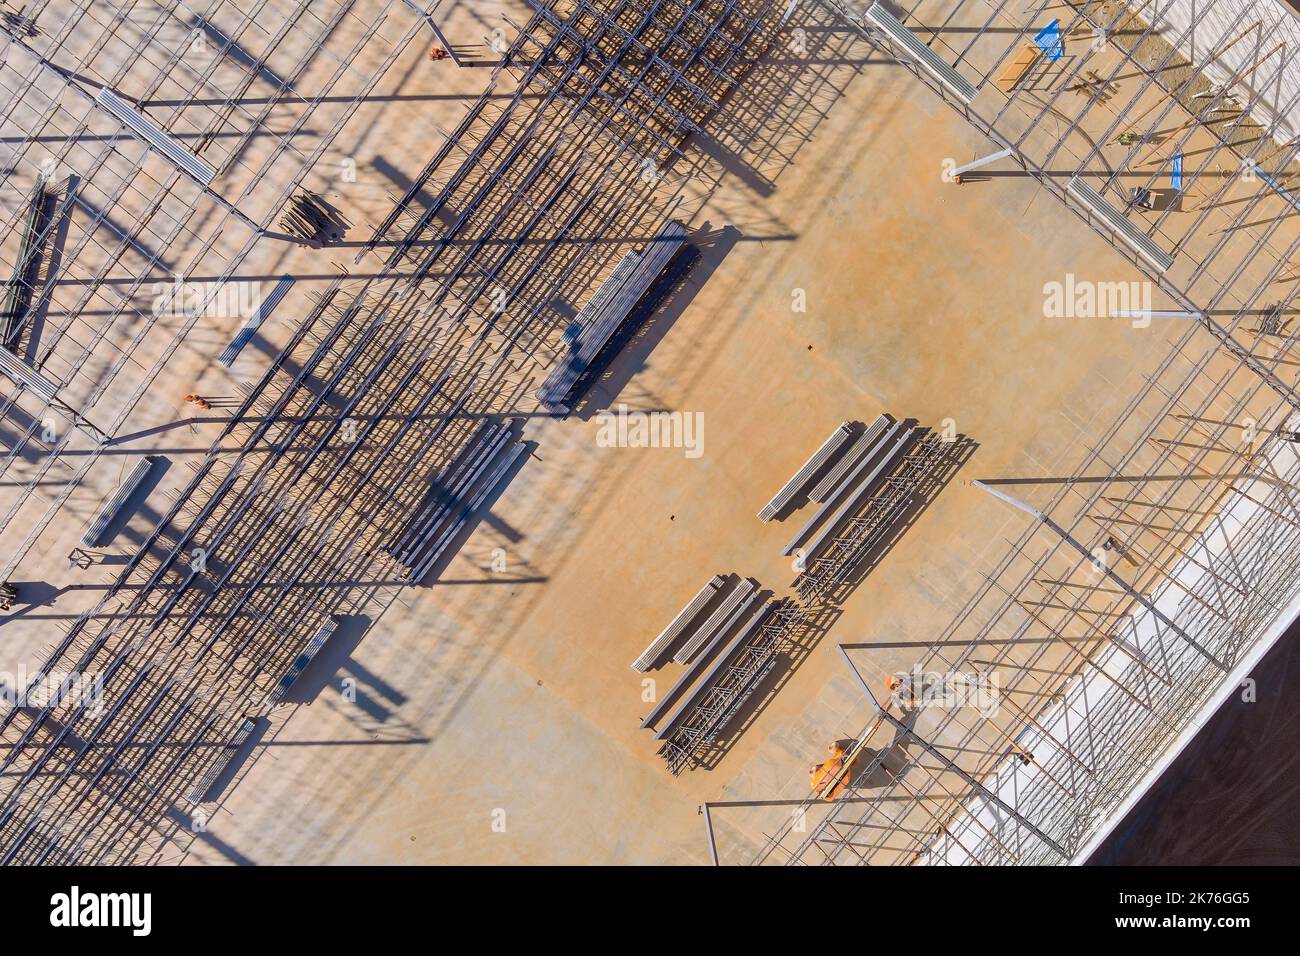 This metal steel aluminum frame structure for factories, warehouses, construction sites Stock Photo